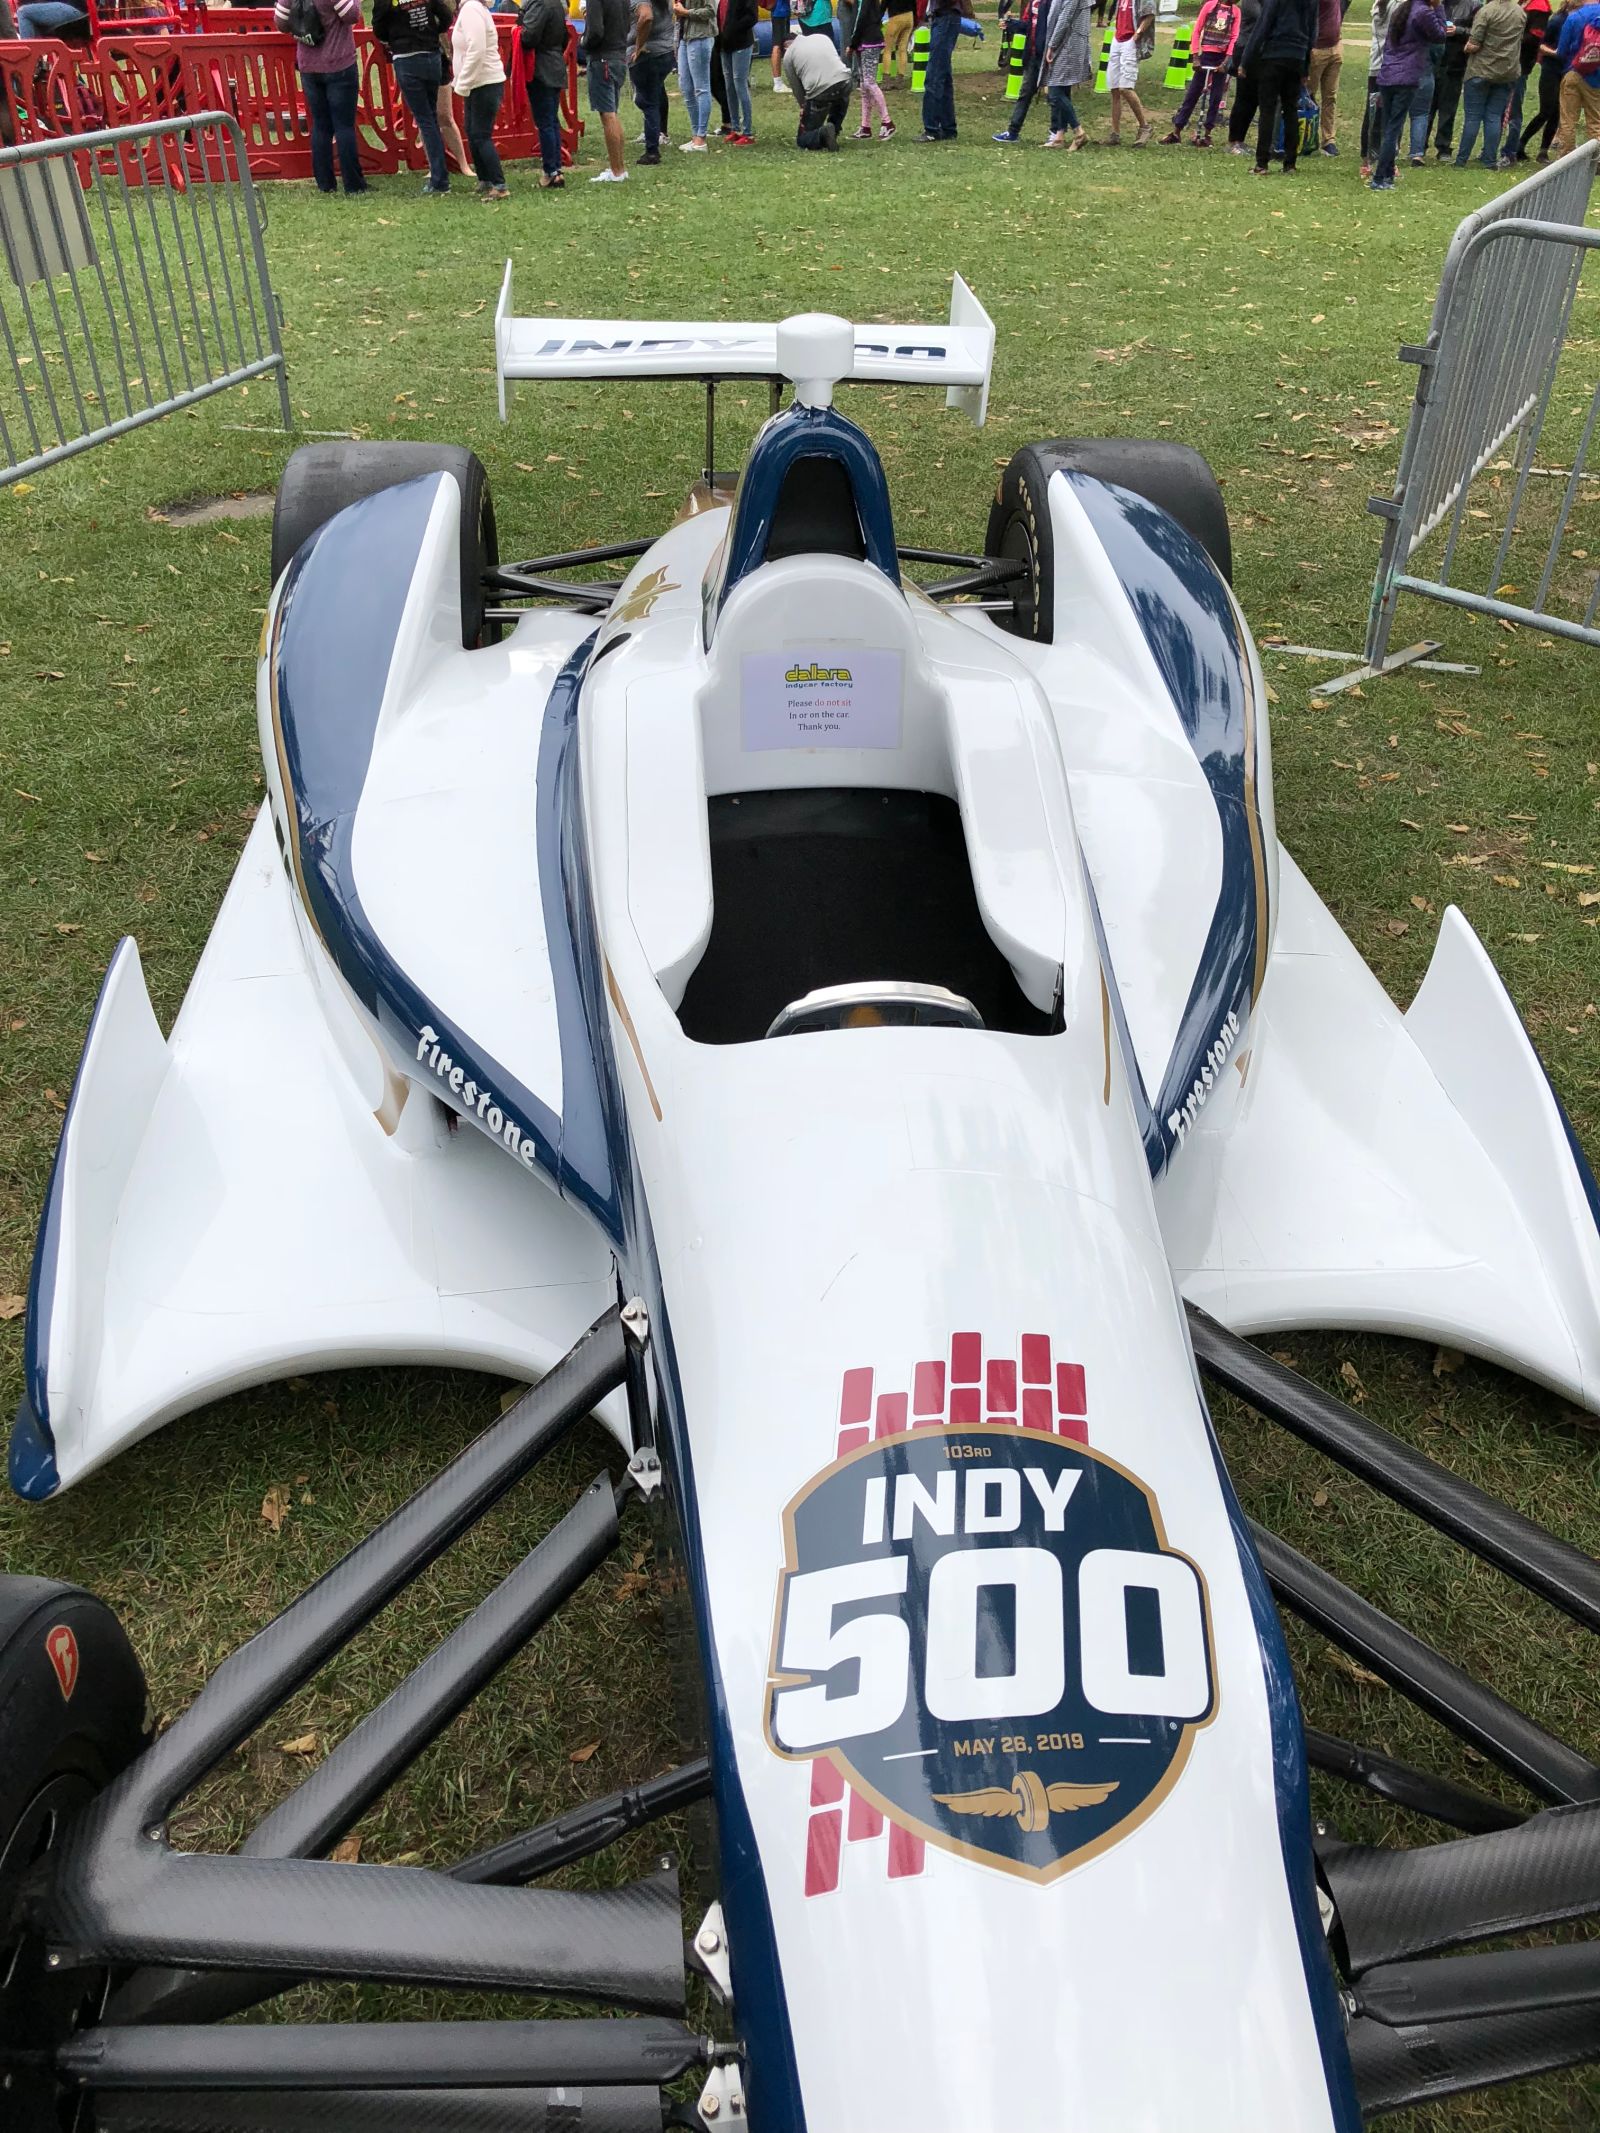 Illustration for article titled Indy 500